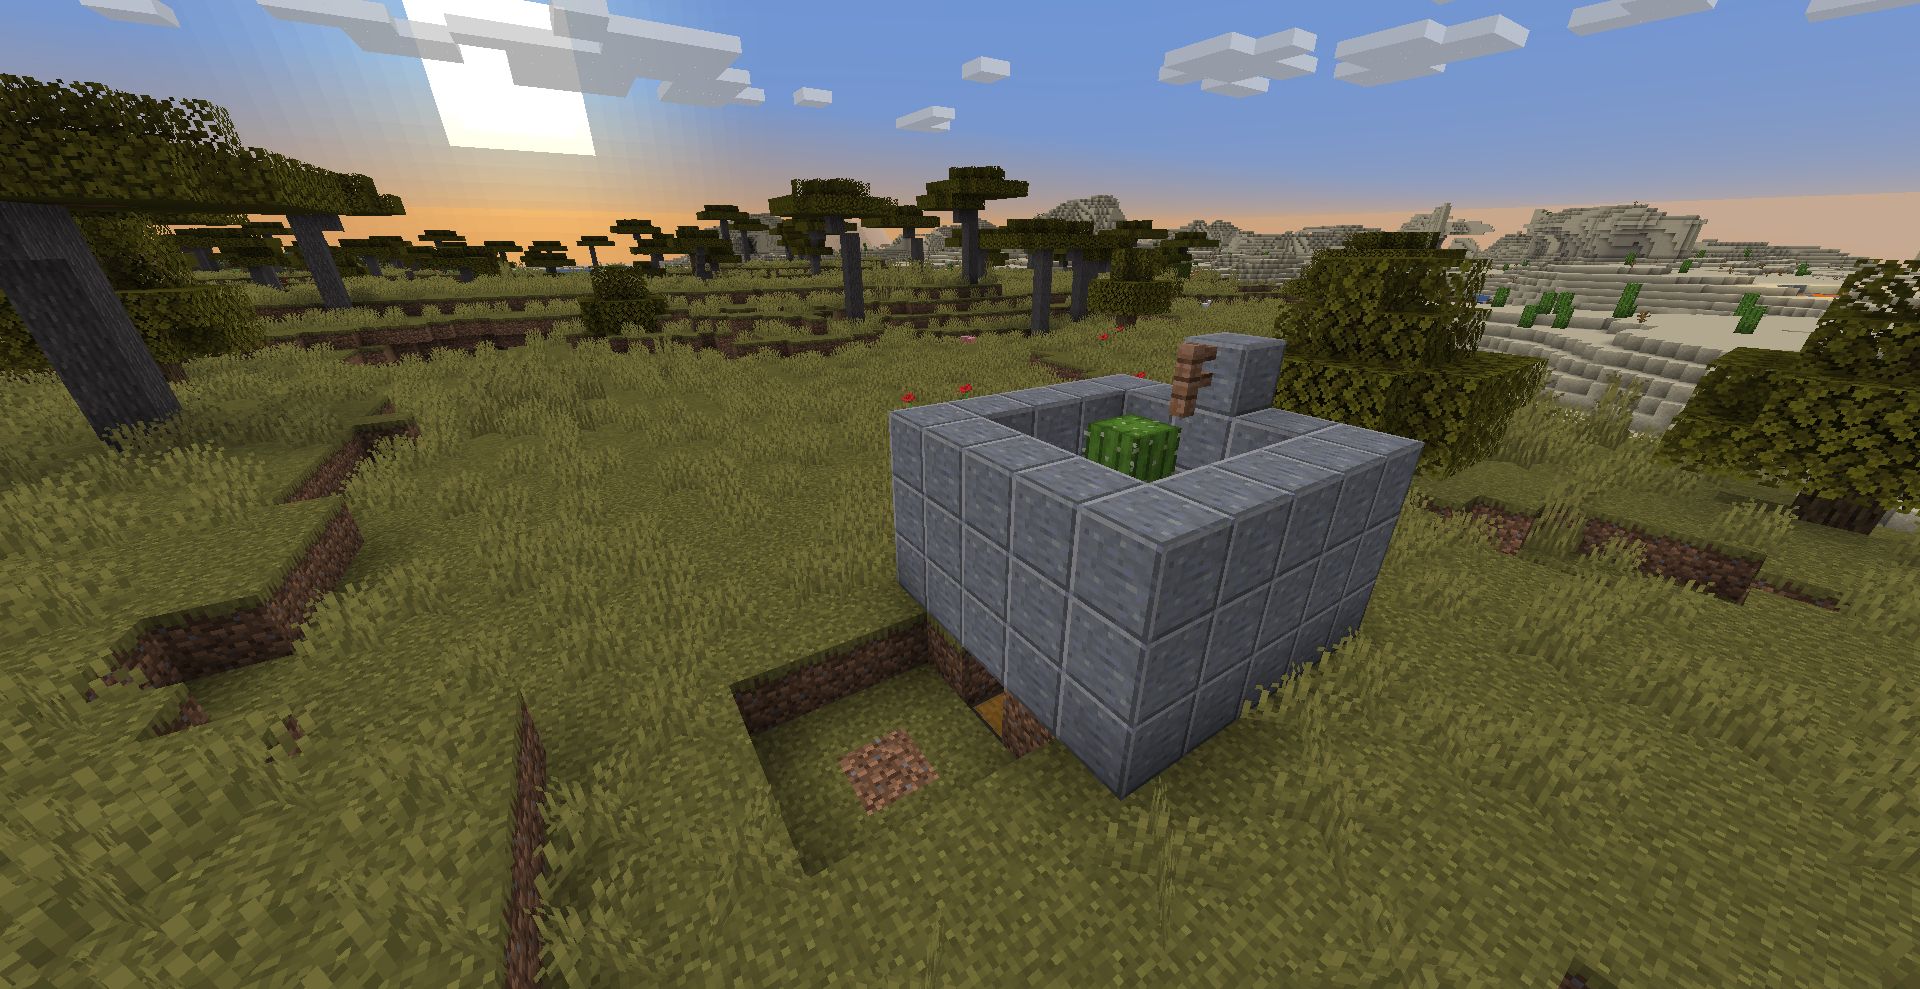 A Single Bonemeal farm in Minecraft with addition of Walls